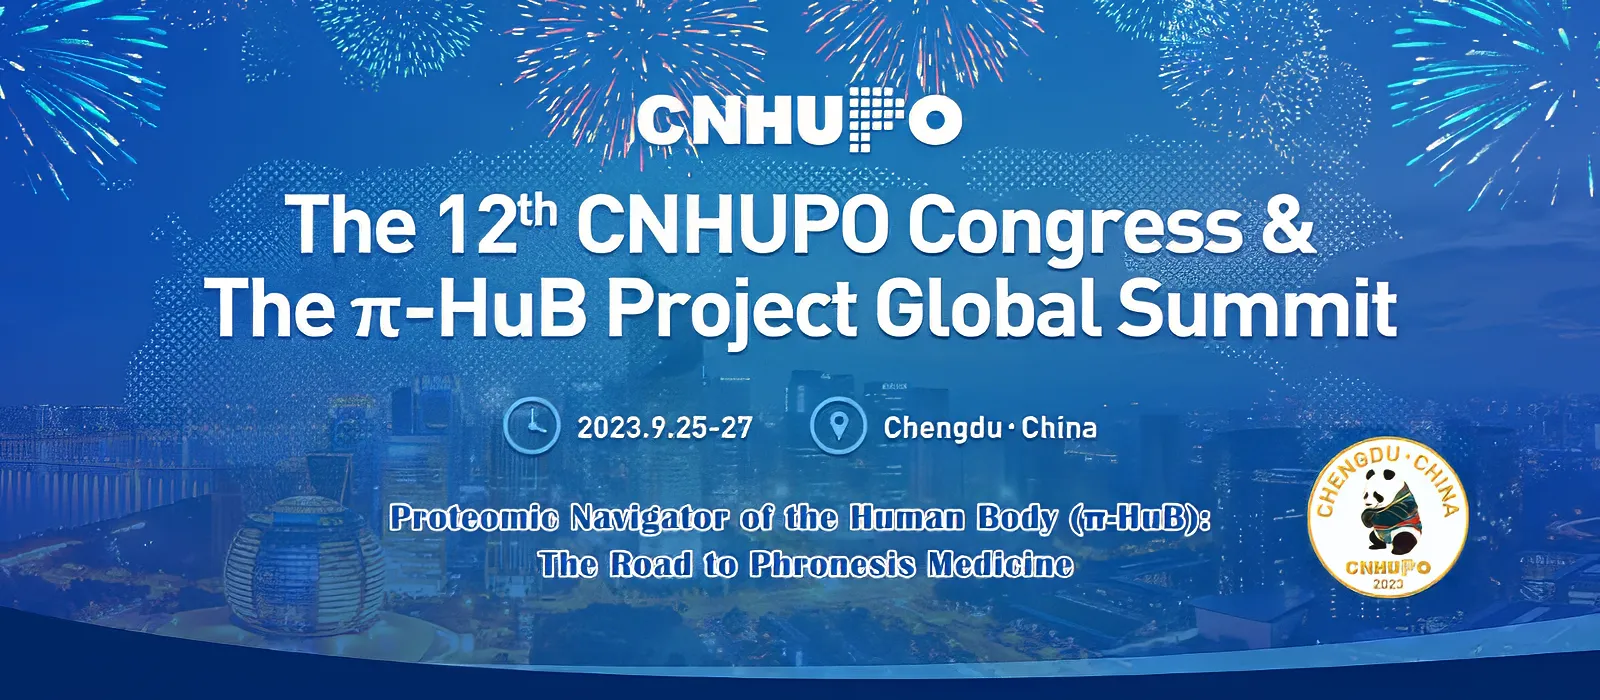 The 12th CNHUPO Congress & The π-HuB Project Global Summit Will Be Held in Chengdu, China from 25th-27th of September 2023